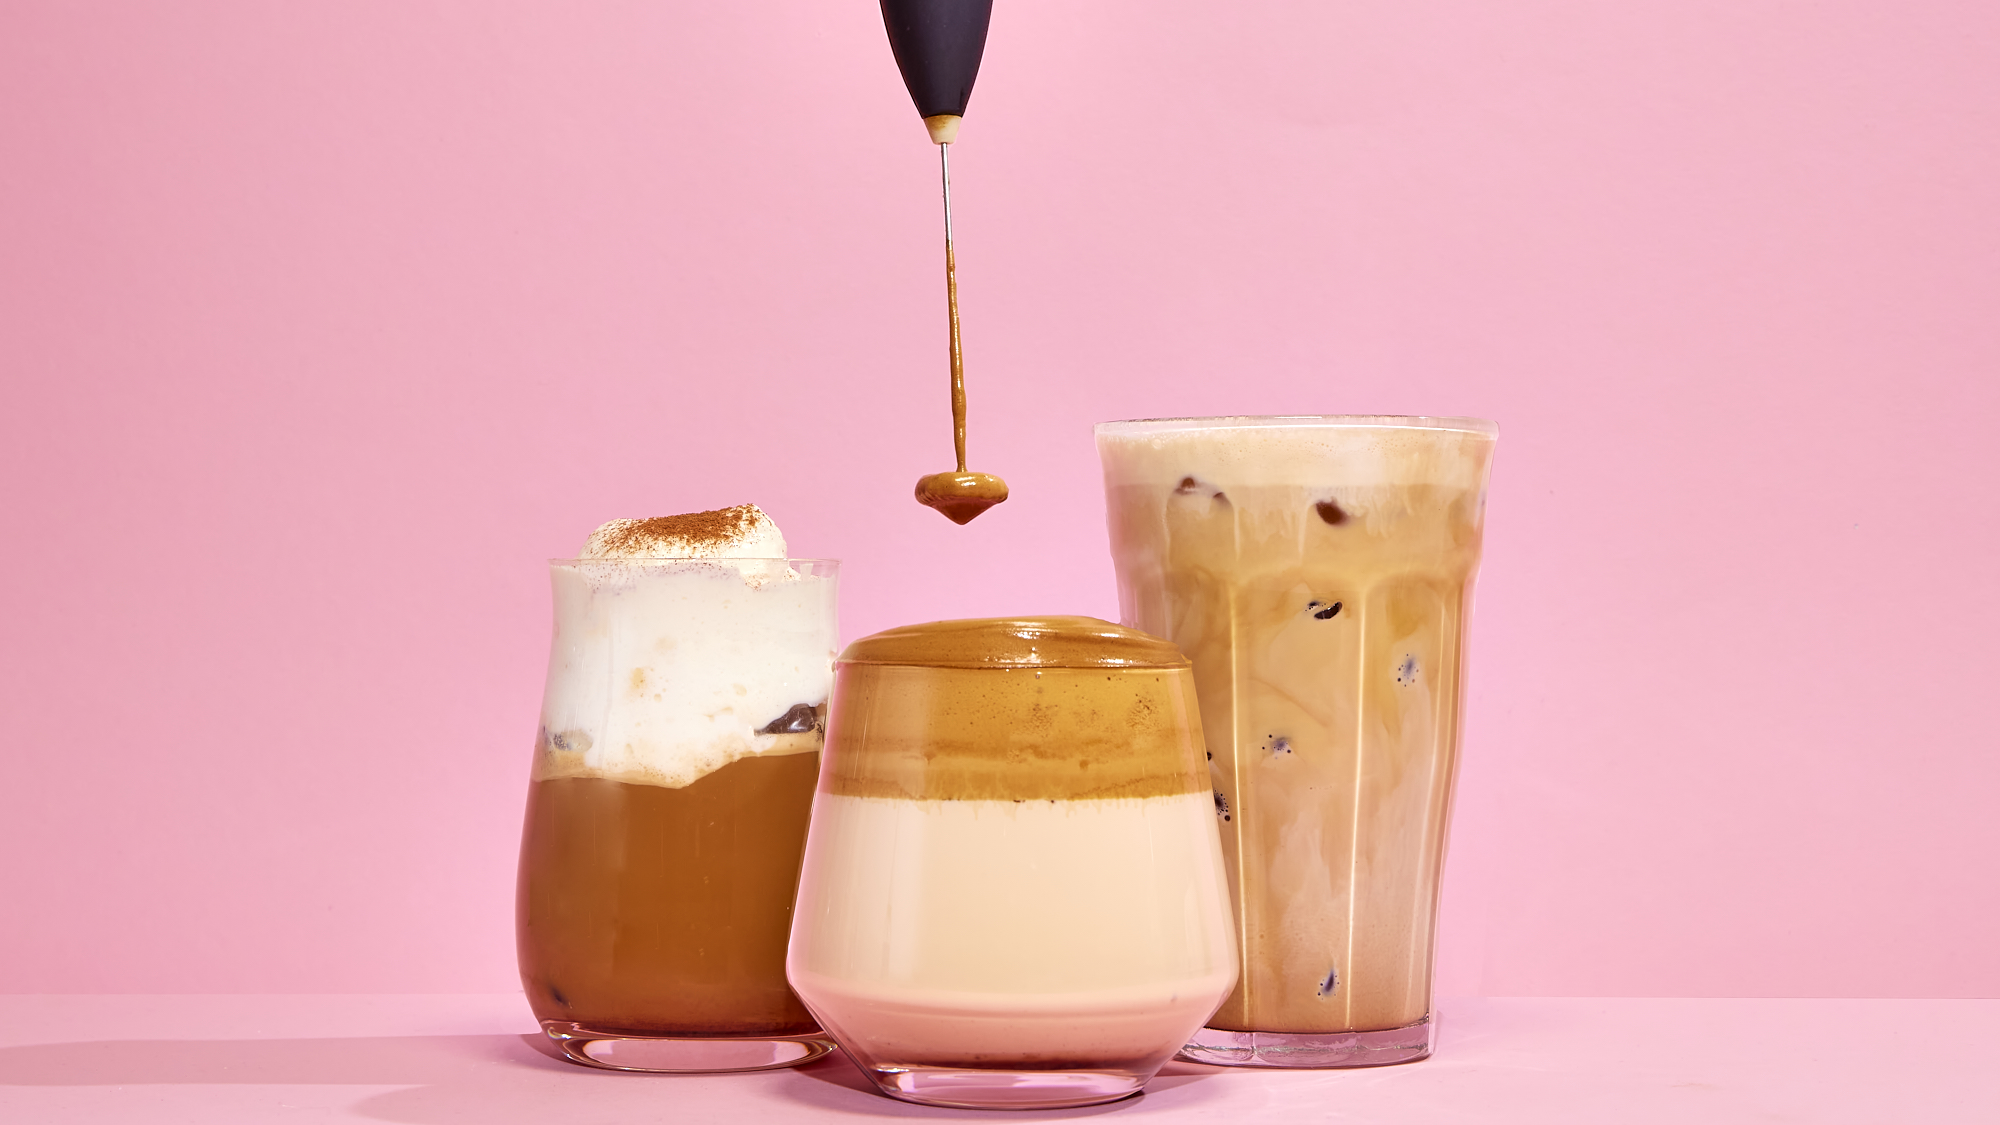 IMPORTANT: I found the viral TikTok iced coffee glasses